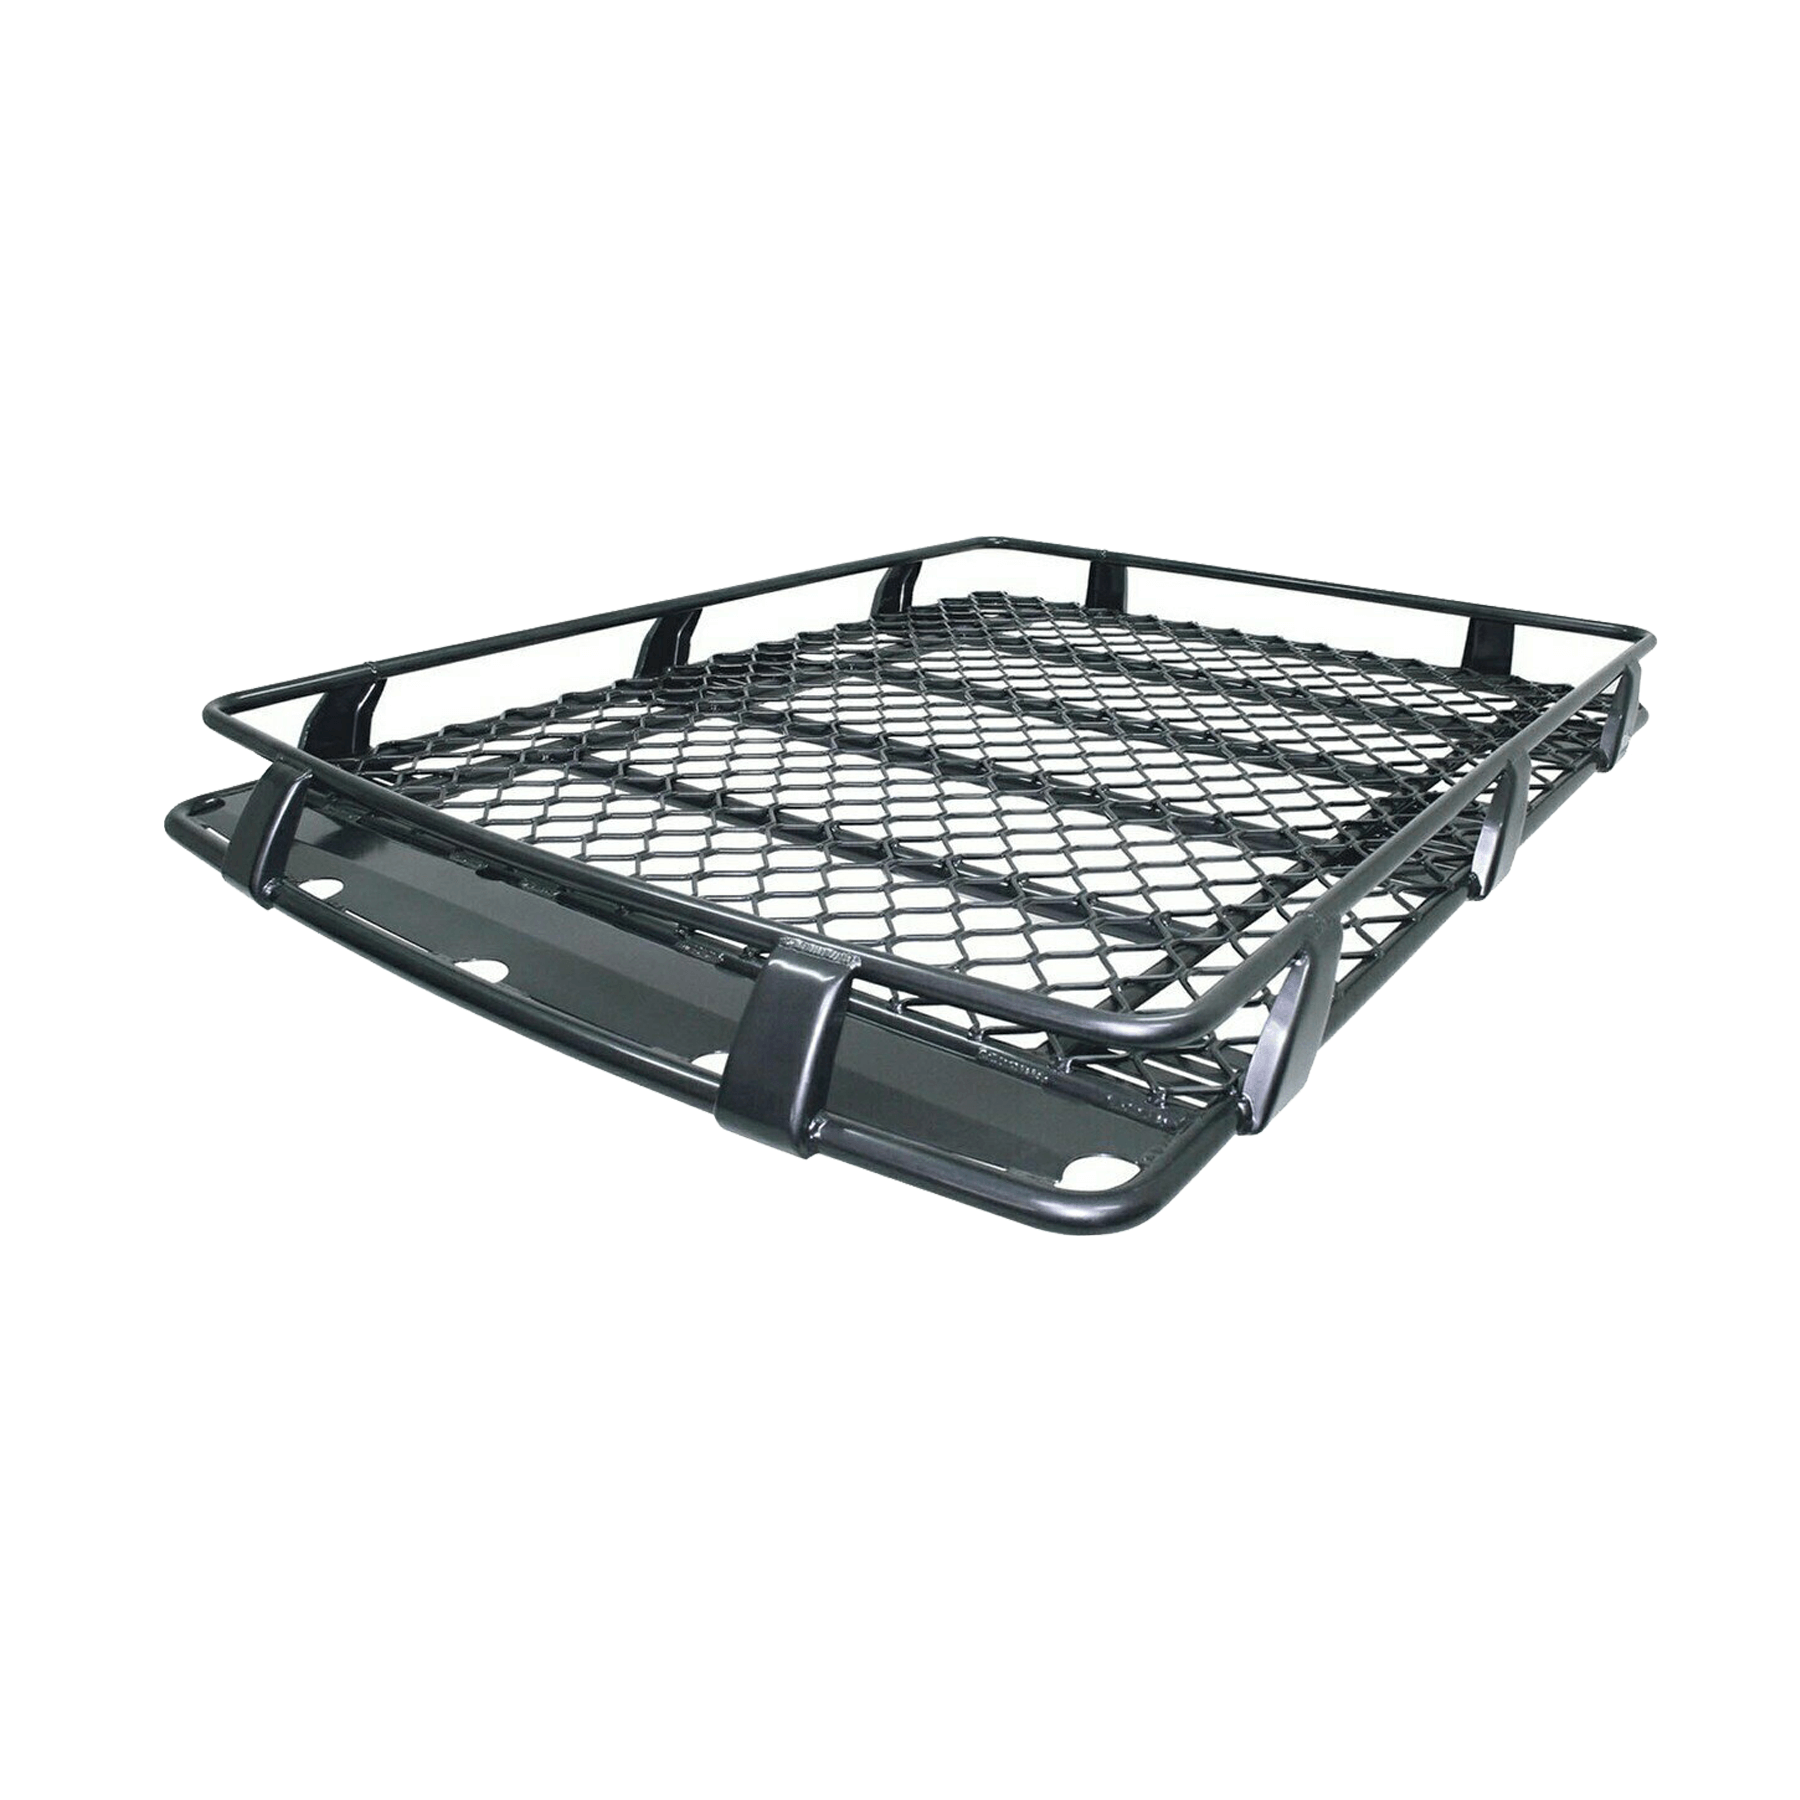 LANDCRUISER 105 SERIES 1998 to 2007 Basket Alloy Roof Rack- 1.8m x 1.25m (Open end)